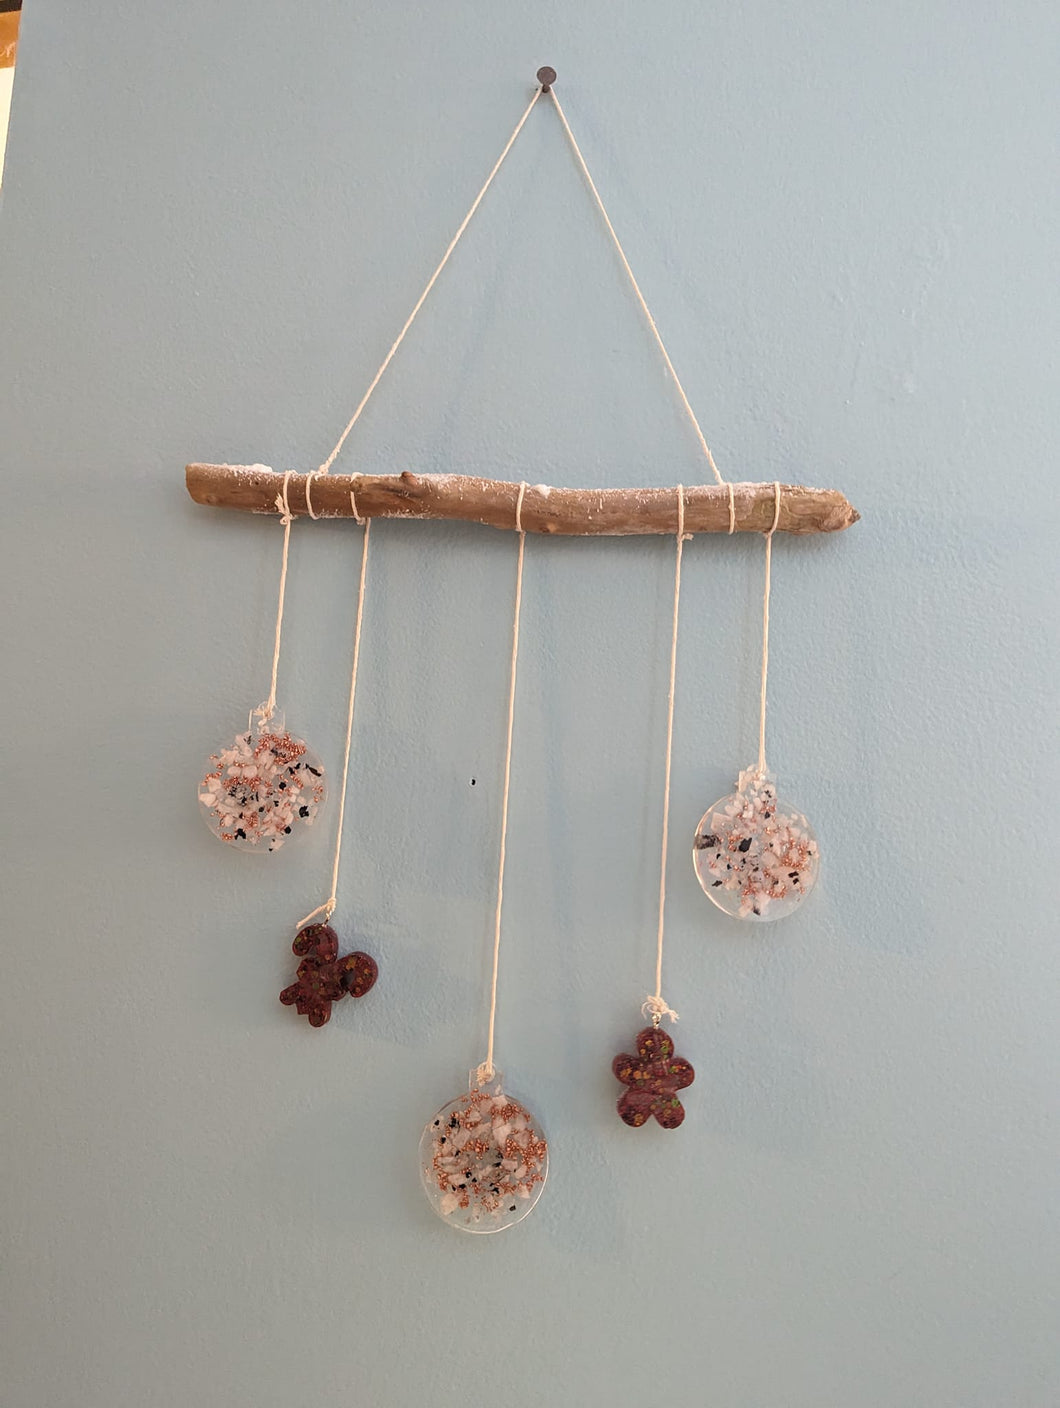 Christmas ornament wall decoration, driftwood Christmas time decoration with crystals